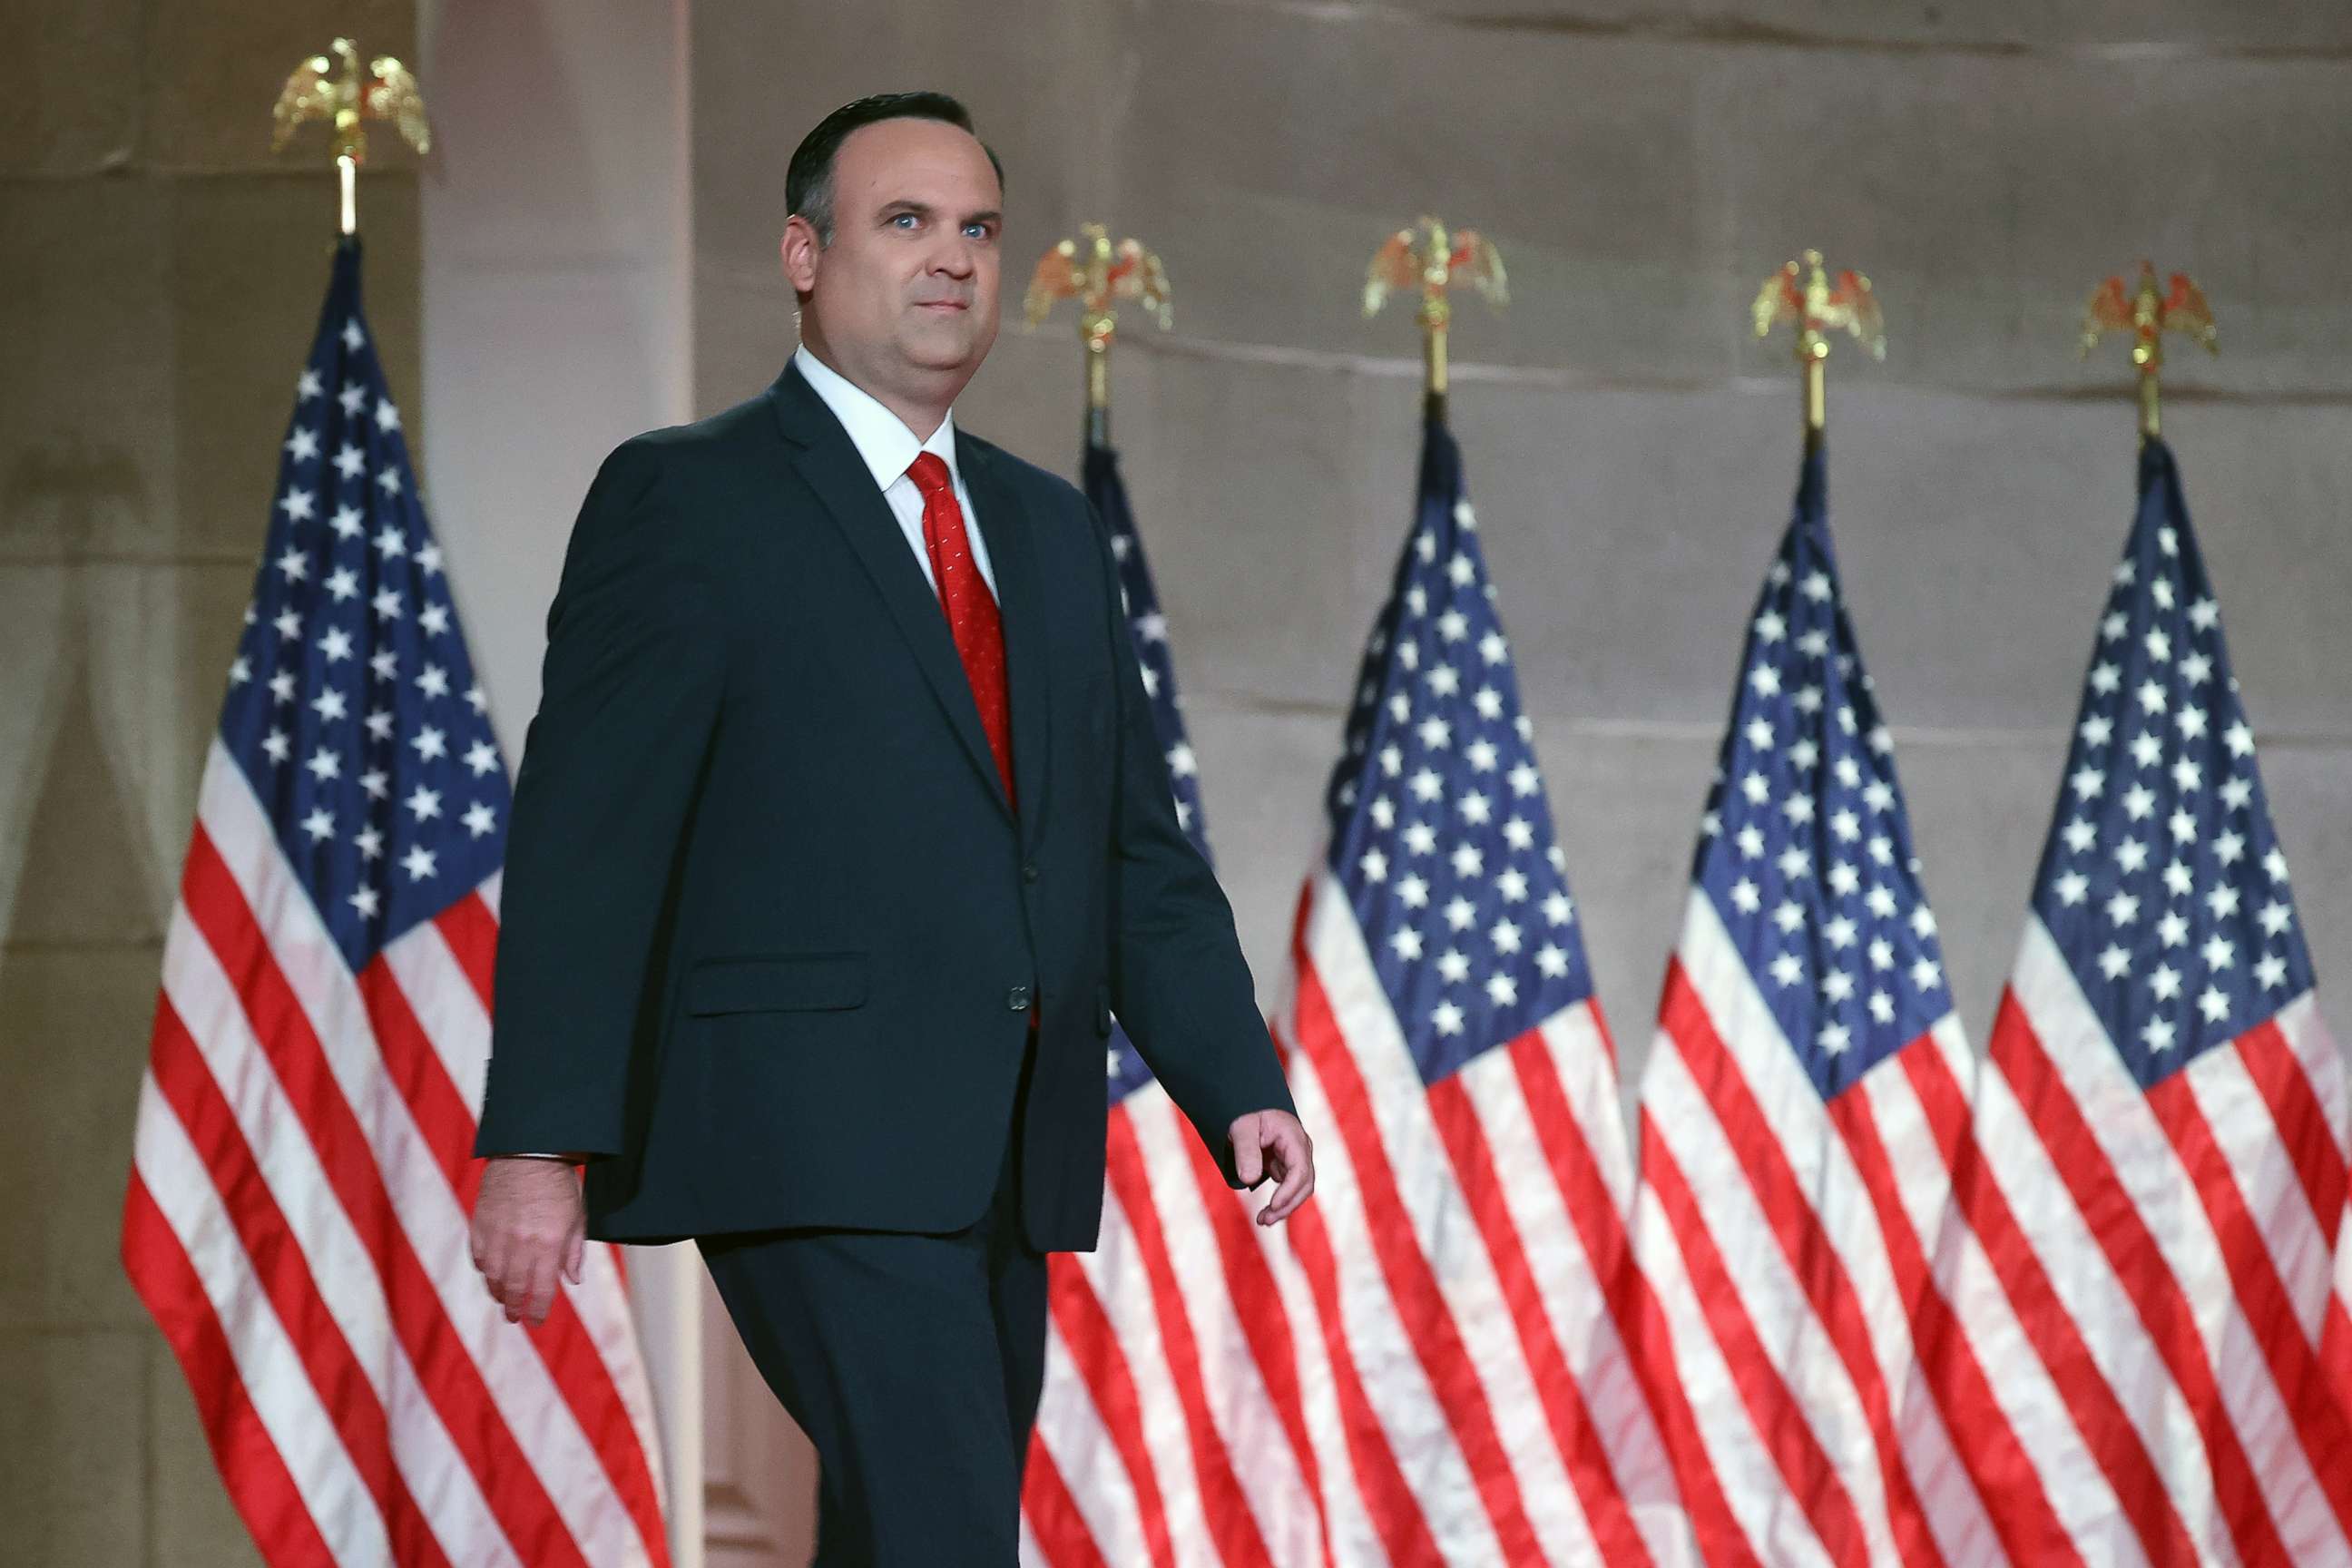 PHOTO: In this Aug. 26, 2020 file photo White House Deputy Chief of Staff for Communications Dan Scavino walks onstage to speak inside the empty Mellon Auditorium in Washington, D.C.